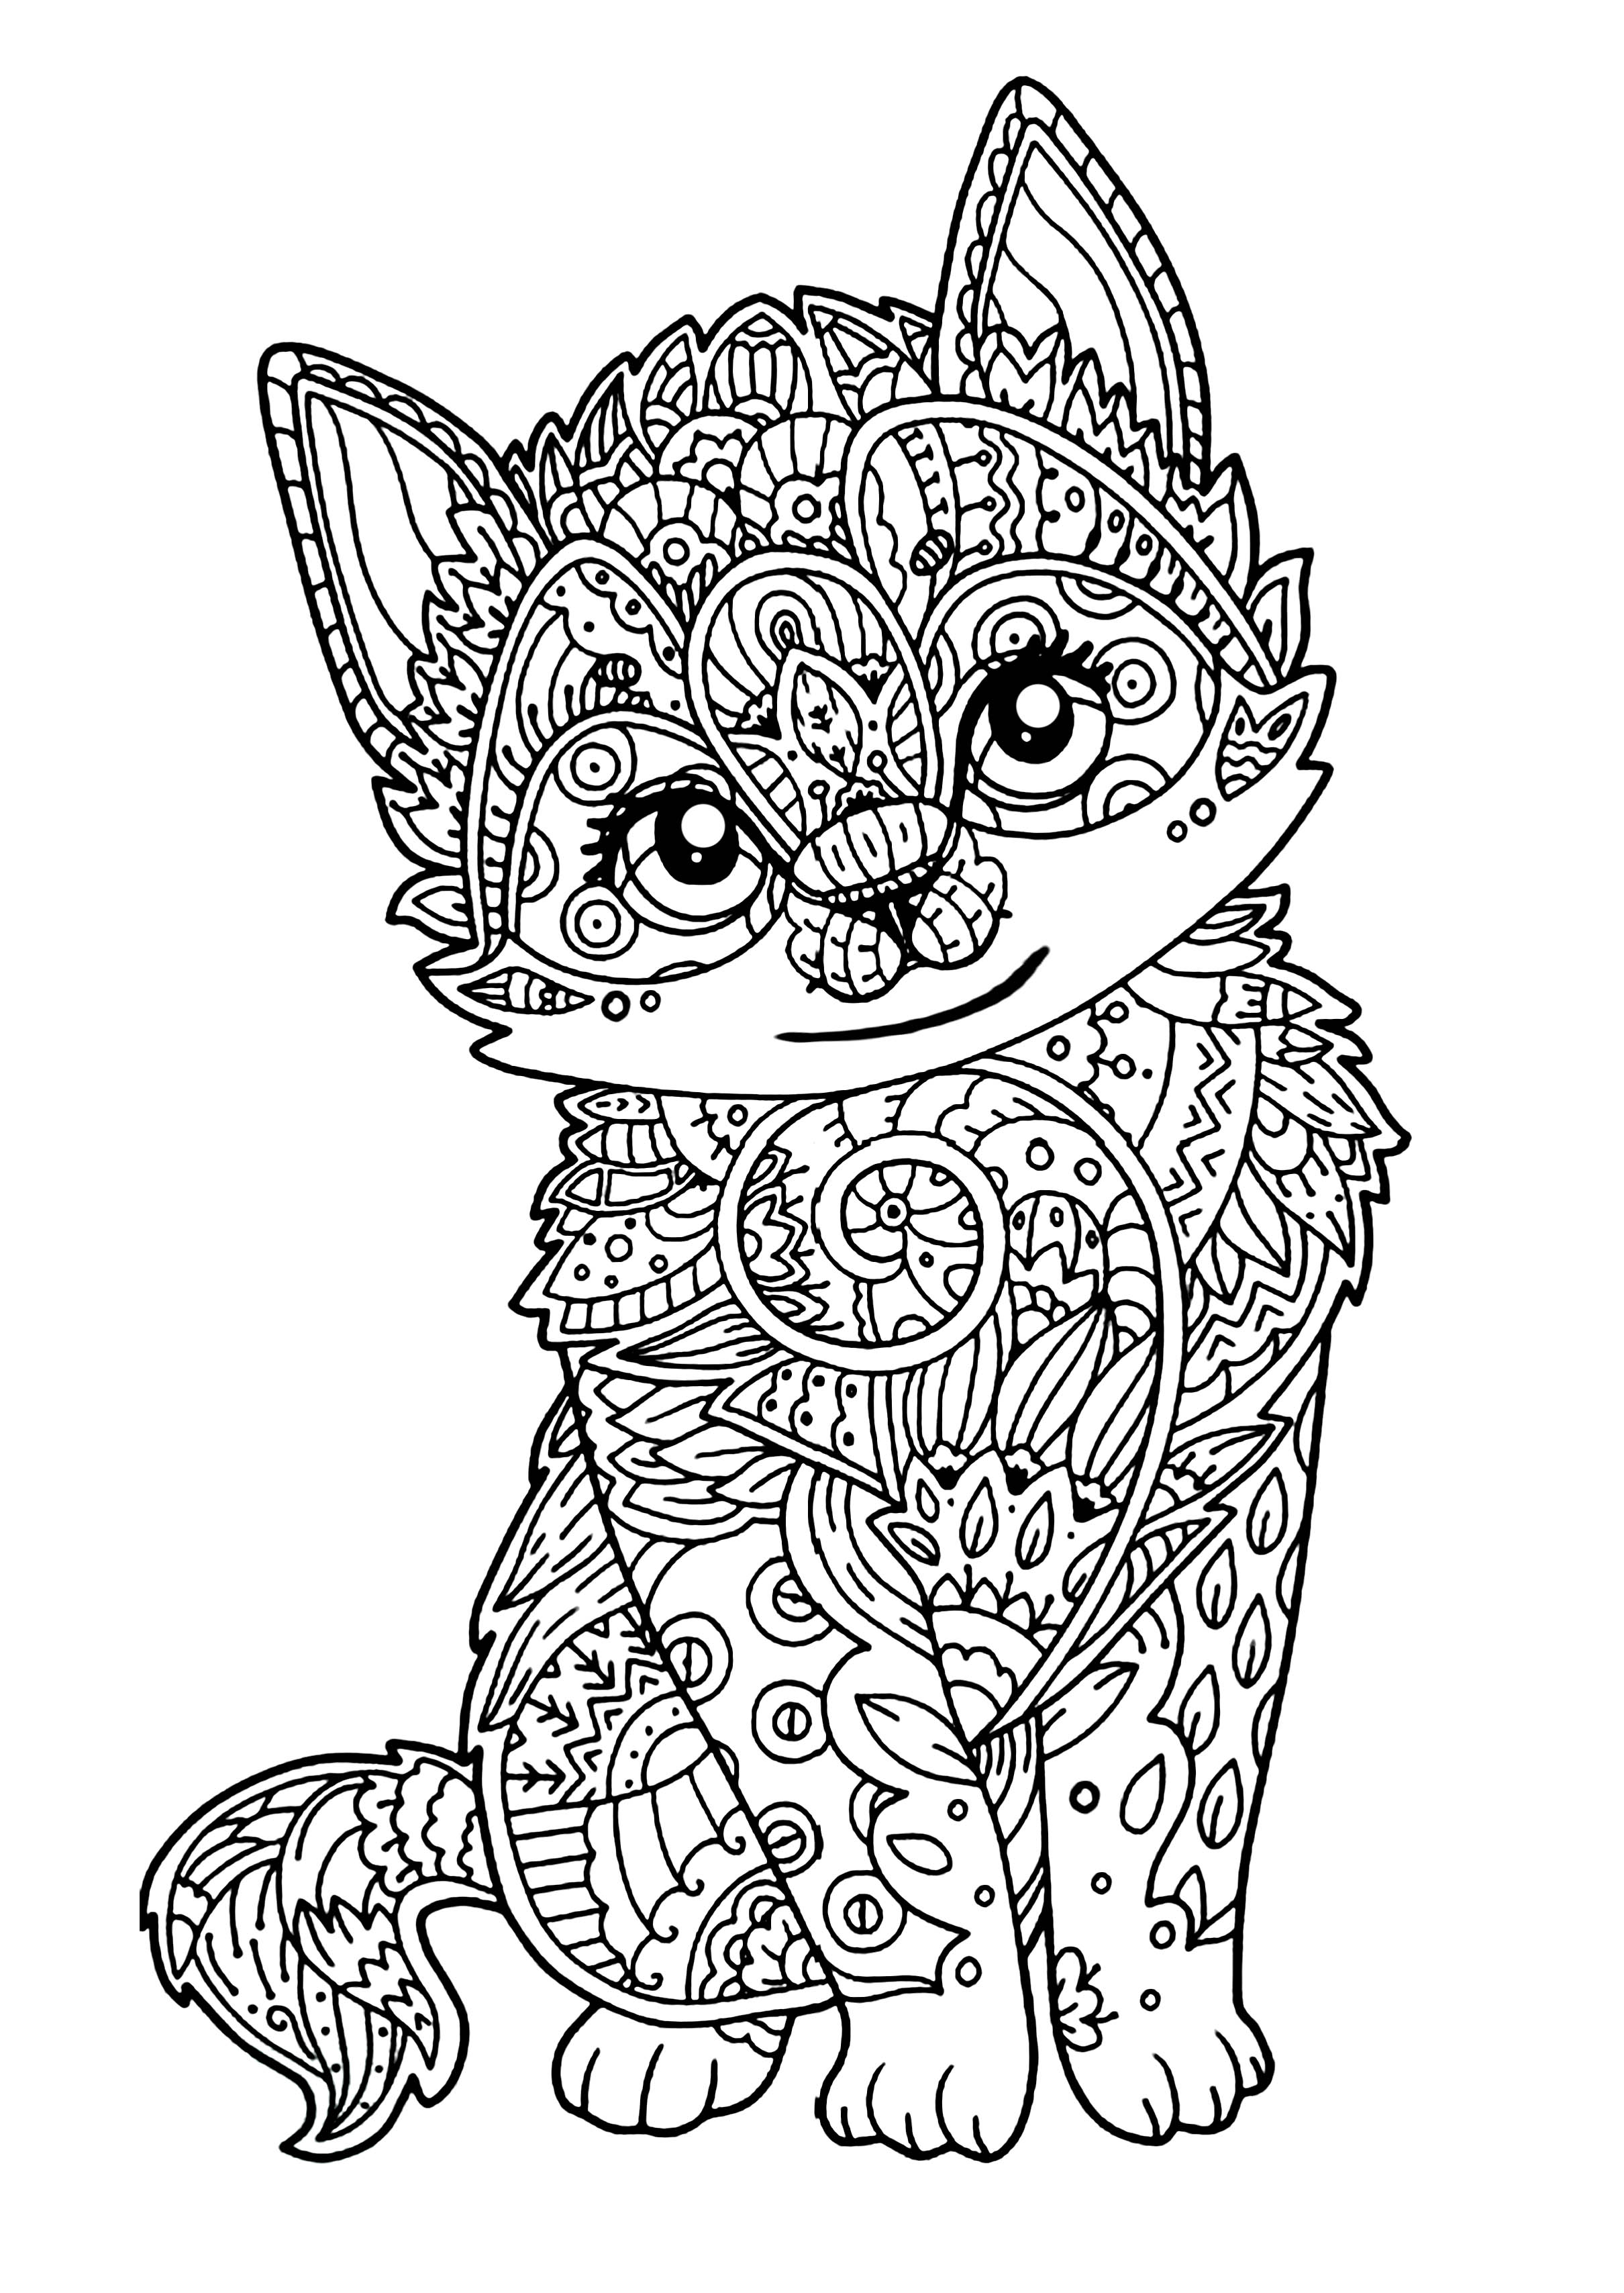 7800 Coloring Pages For Adults Kitten Images & Pictures In HD